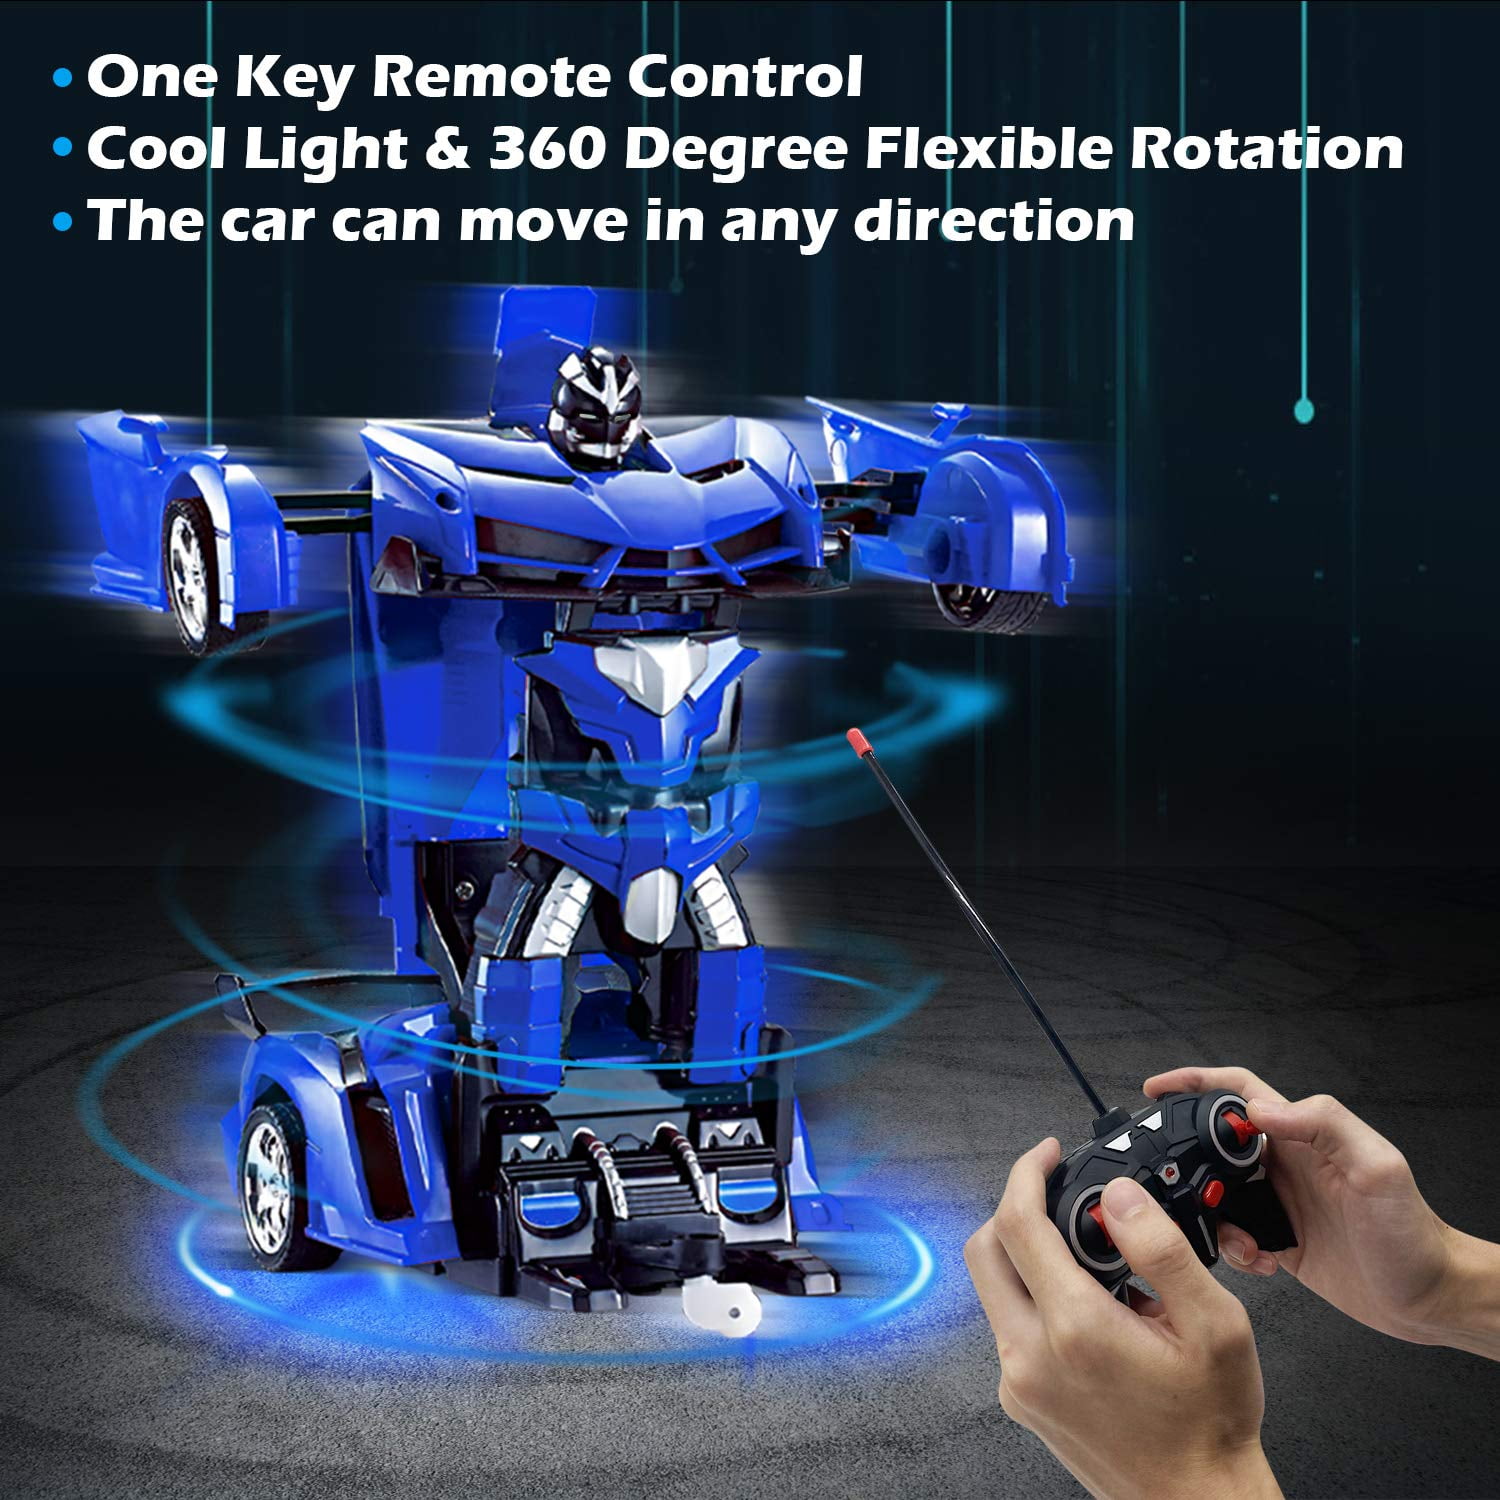 BATTERY OPERATED TRANSFORMING ROBOT TO DRAGON KIDS TOY with REMOTE CON –  CarZ4KidS